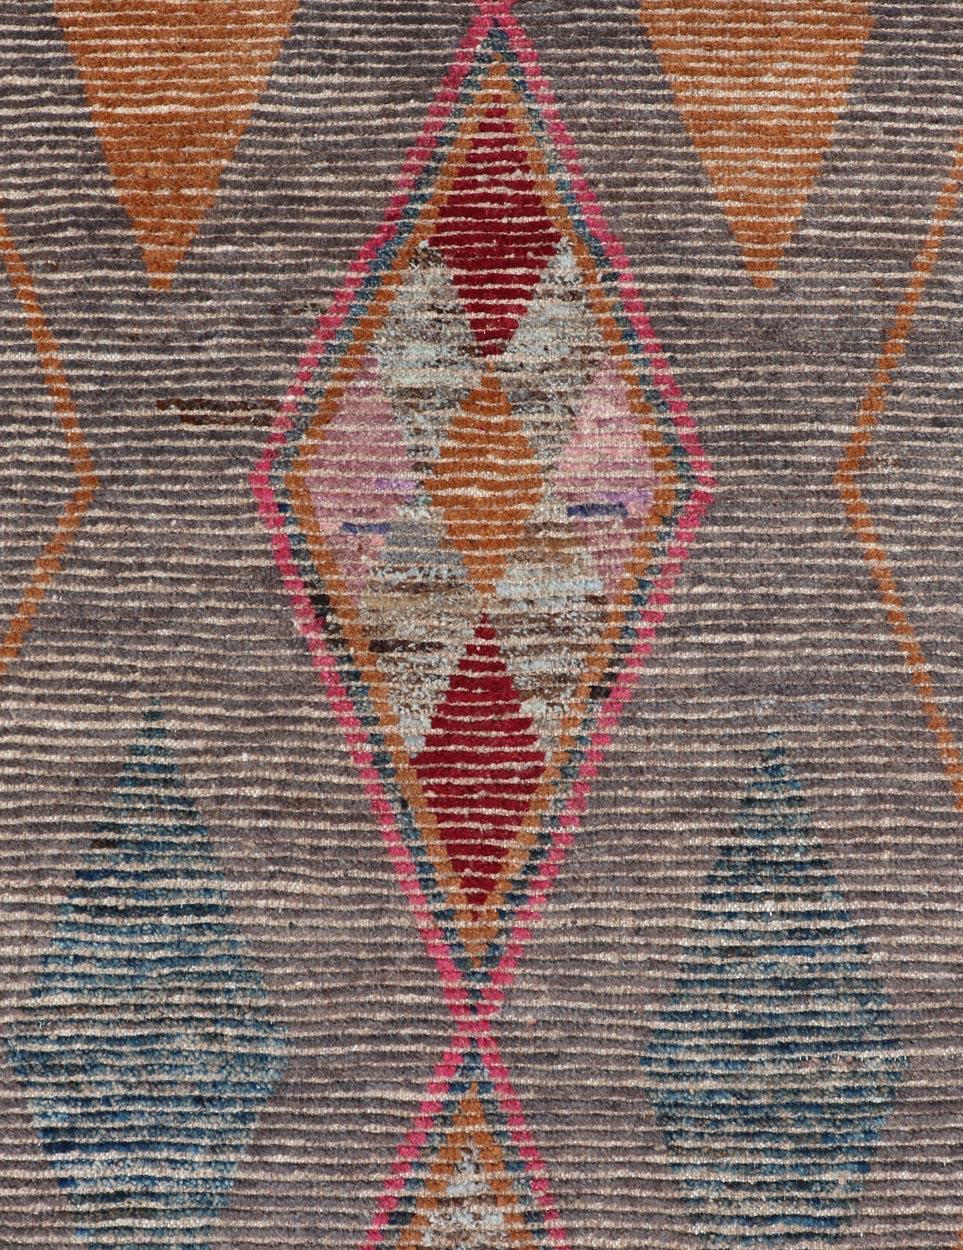 All-Over Modern Tribal Design on a Grey Background with Medallions With Red. Keivan Woven Arts/ rug SNK-2271, country of origin / type: Afghanistan / Piled, condition: new
Measures: 3'4 x 15'11 
This runner features a modern all-over modern design